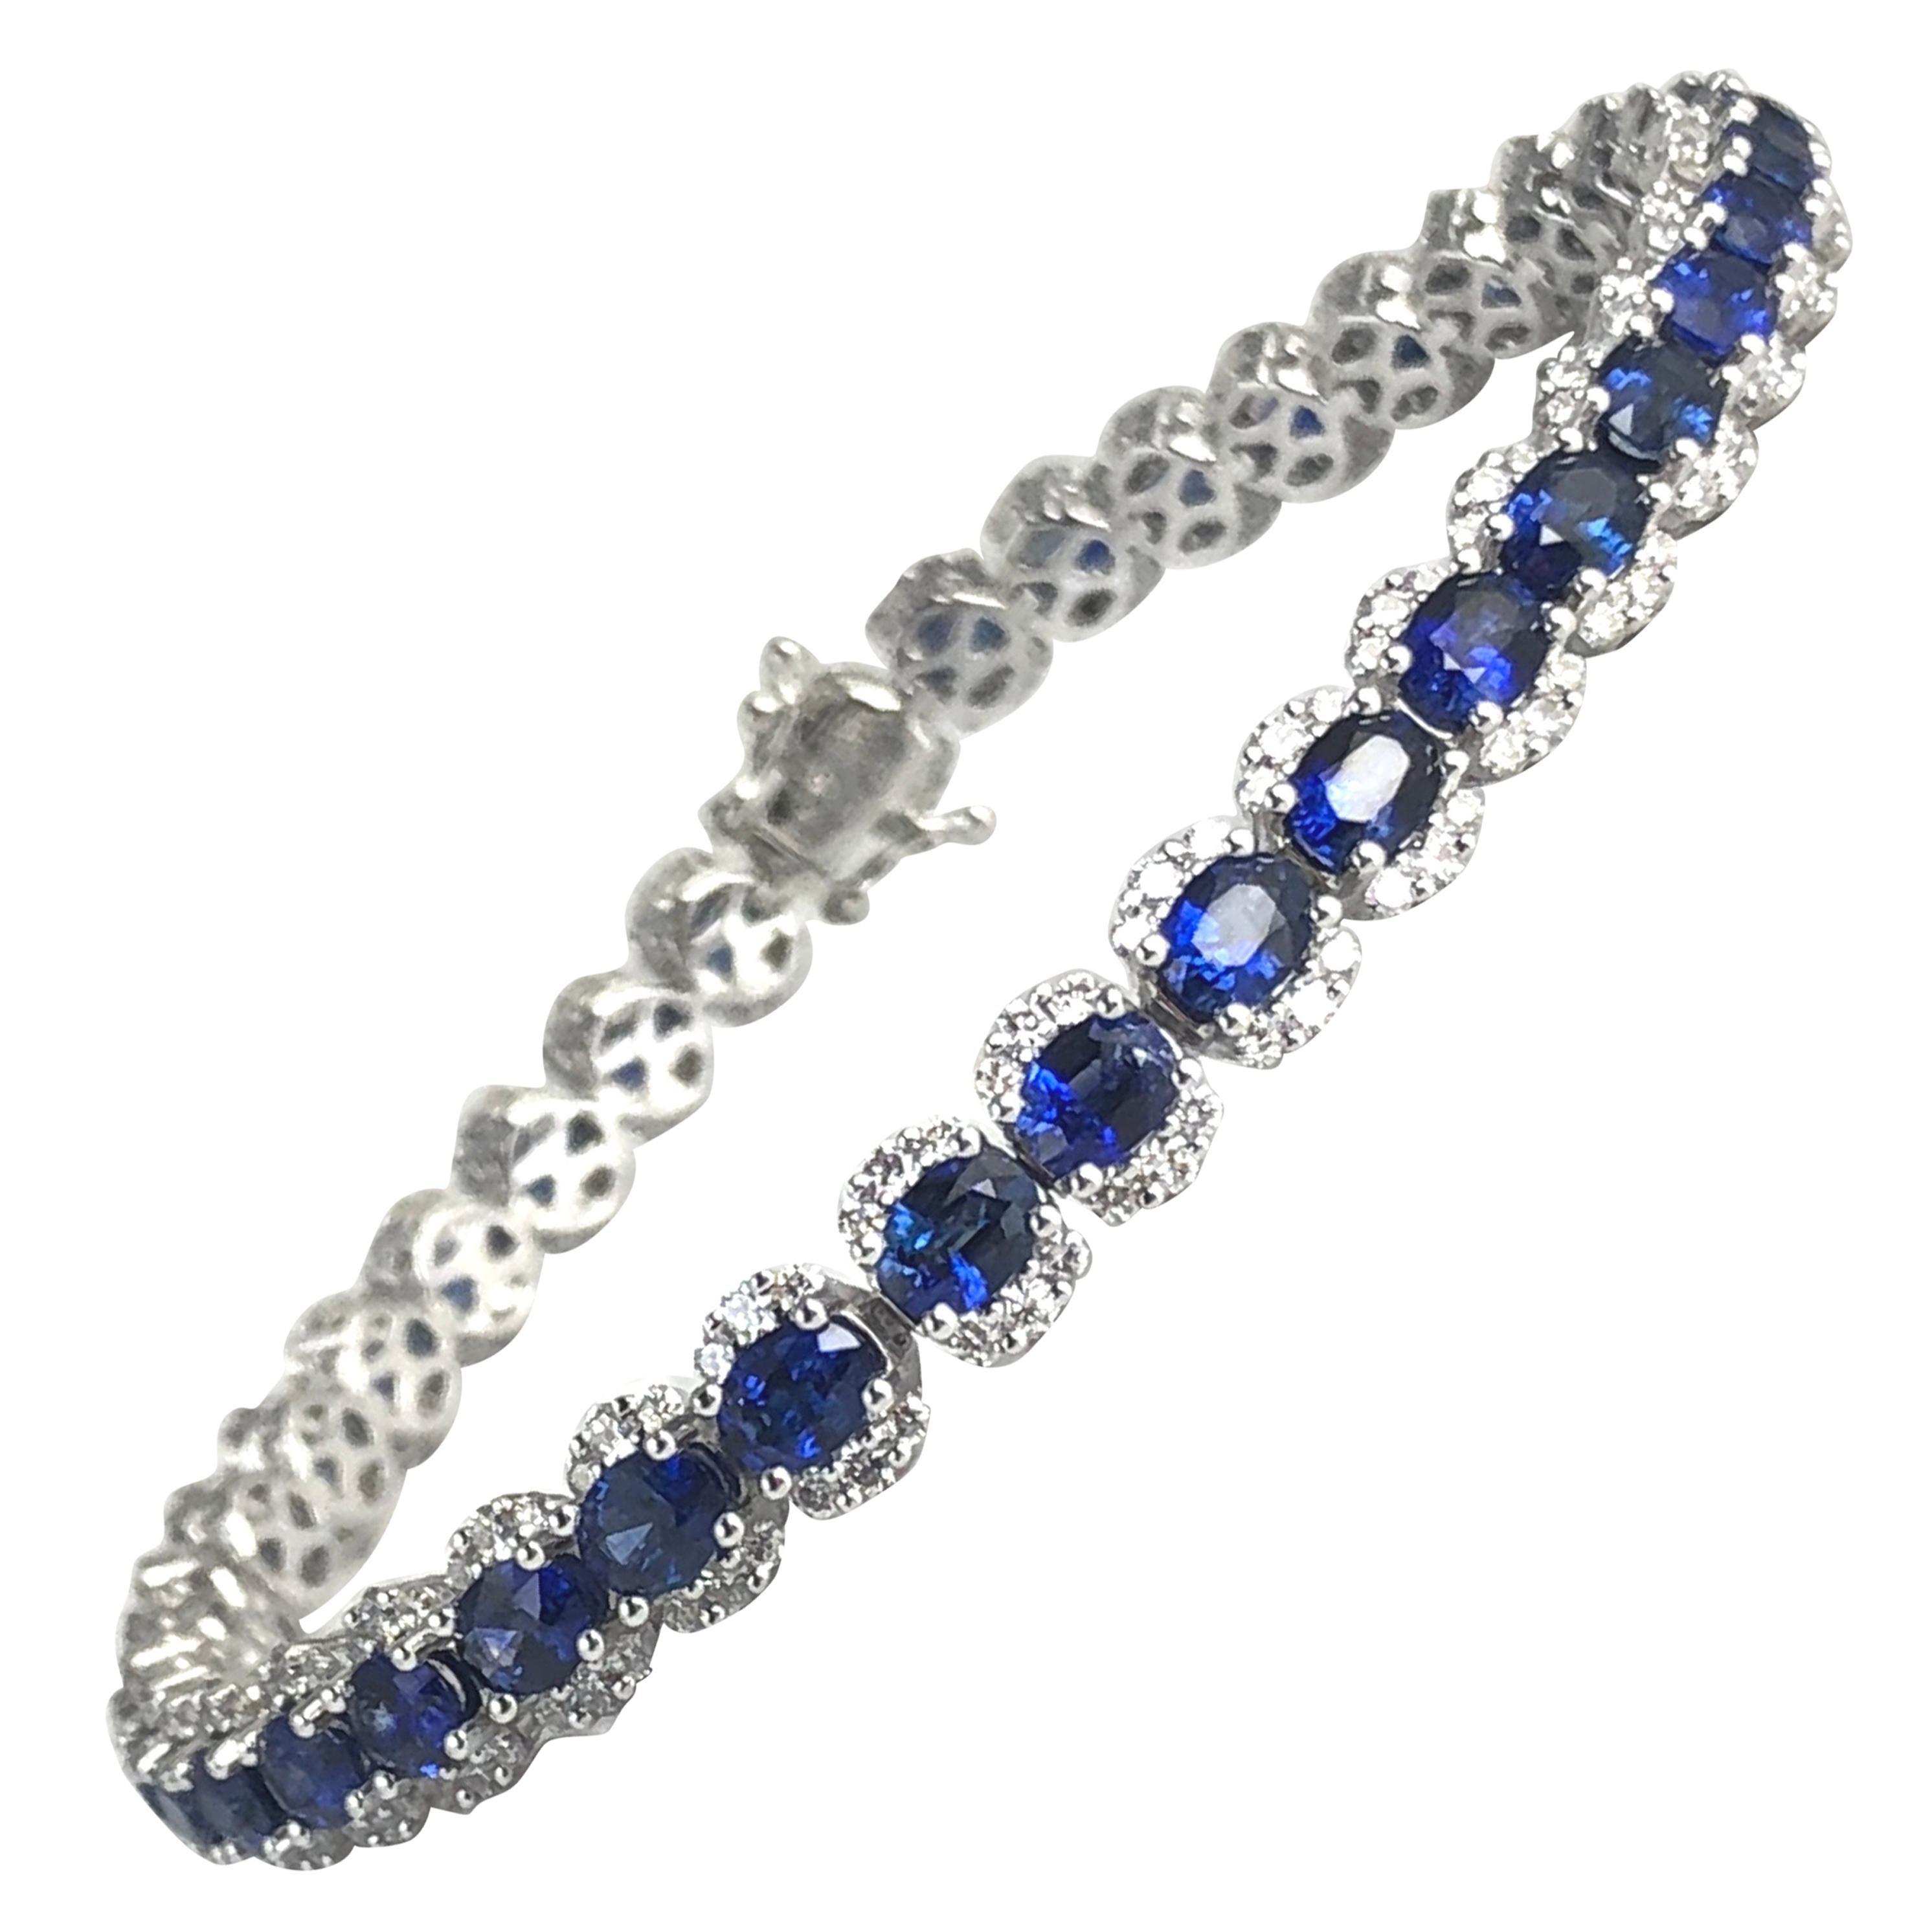 (DiamondTown) This bracelet features 39 oval cut sapphires (total weight 7.64 carats) inside a halo of round white diamonds (total diamond weight 1.87 carats). Set in 18k White Gold

Bracelet measures 7